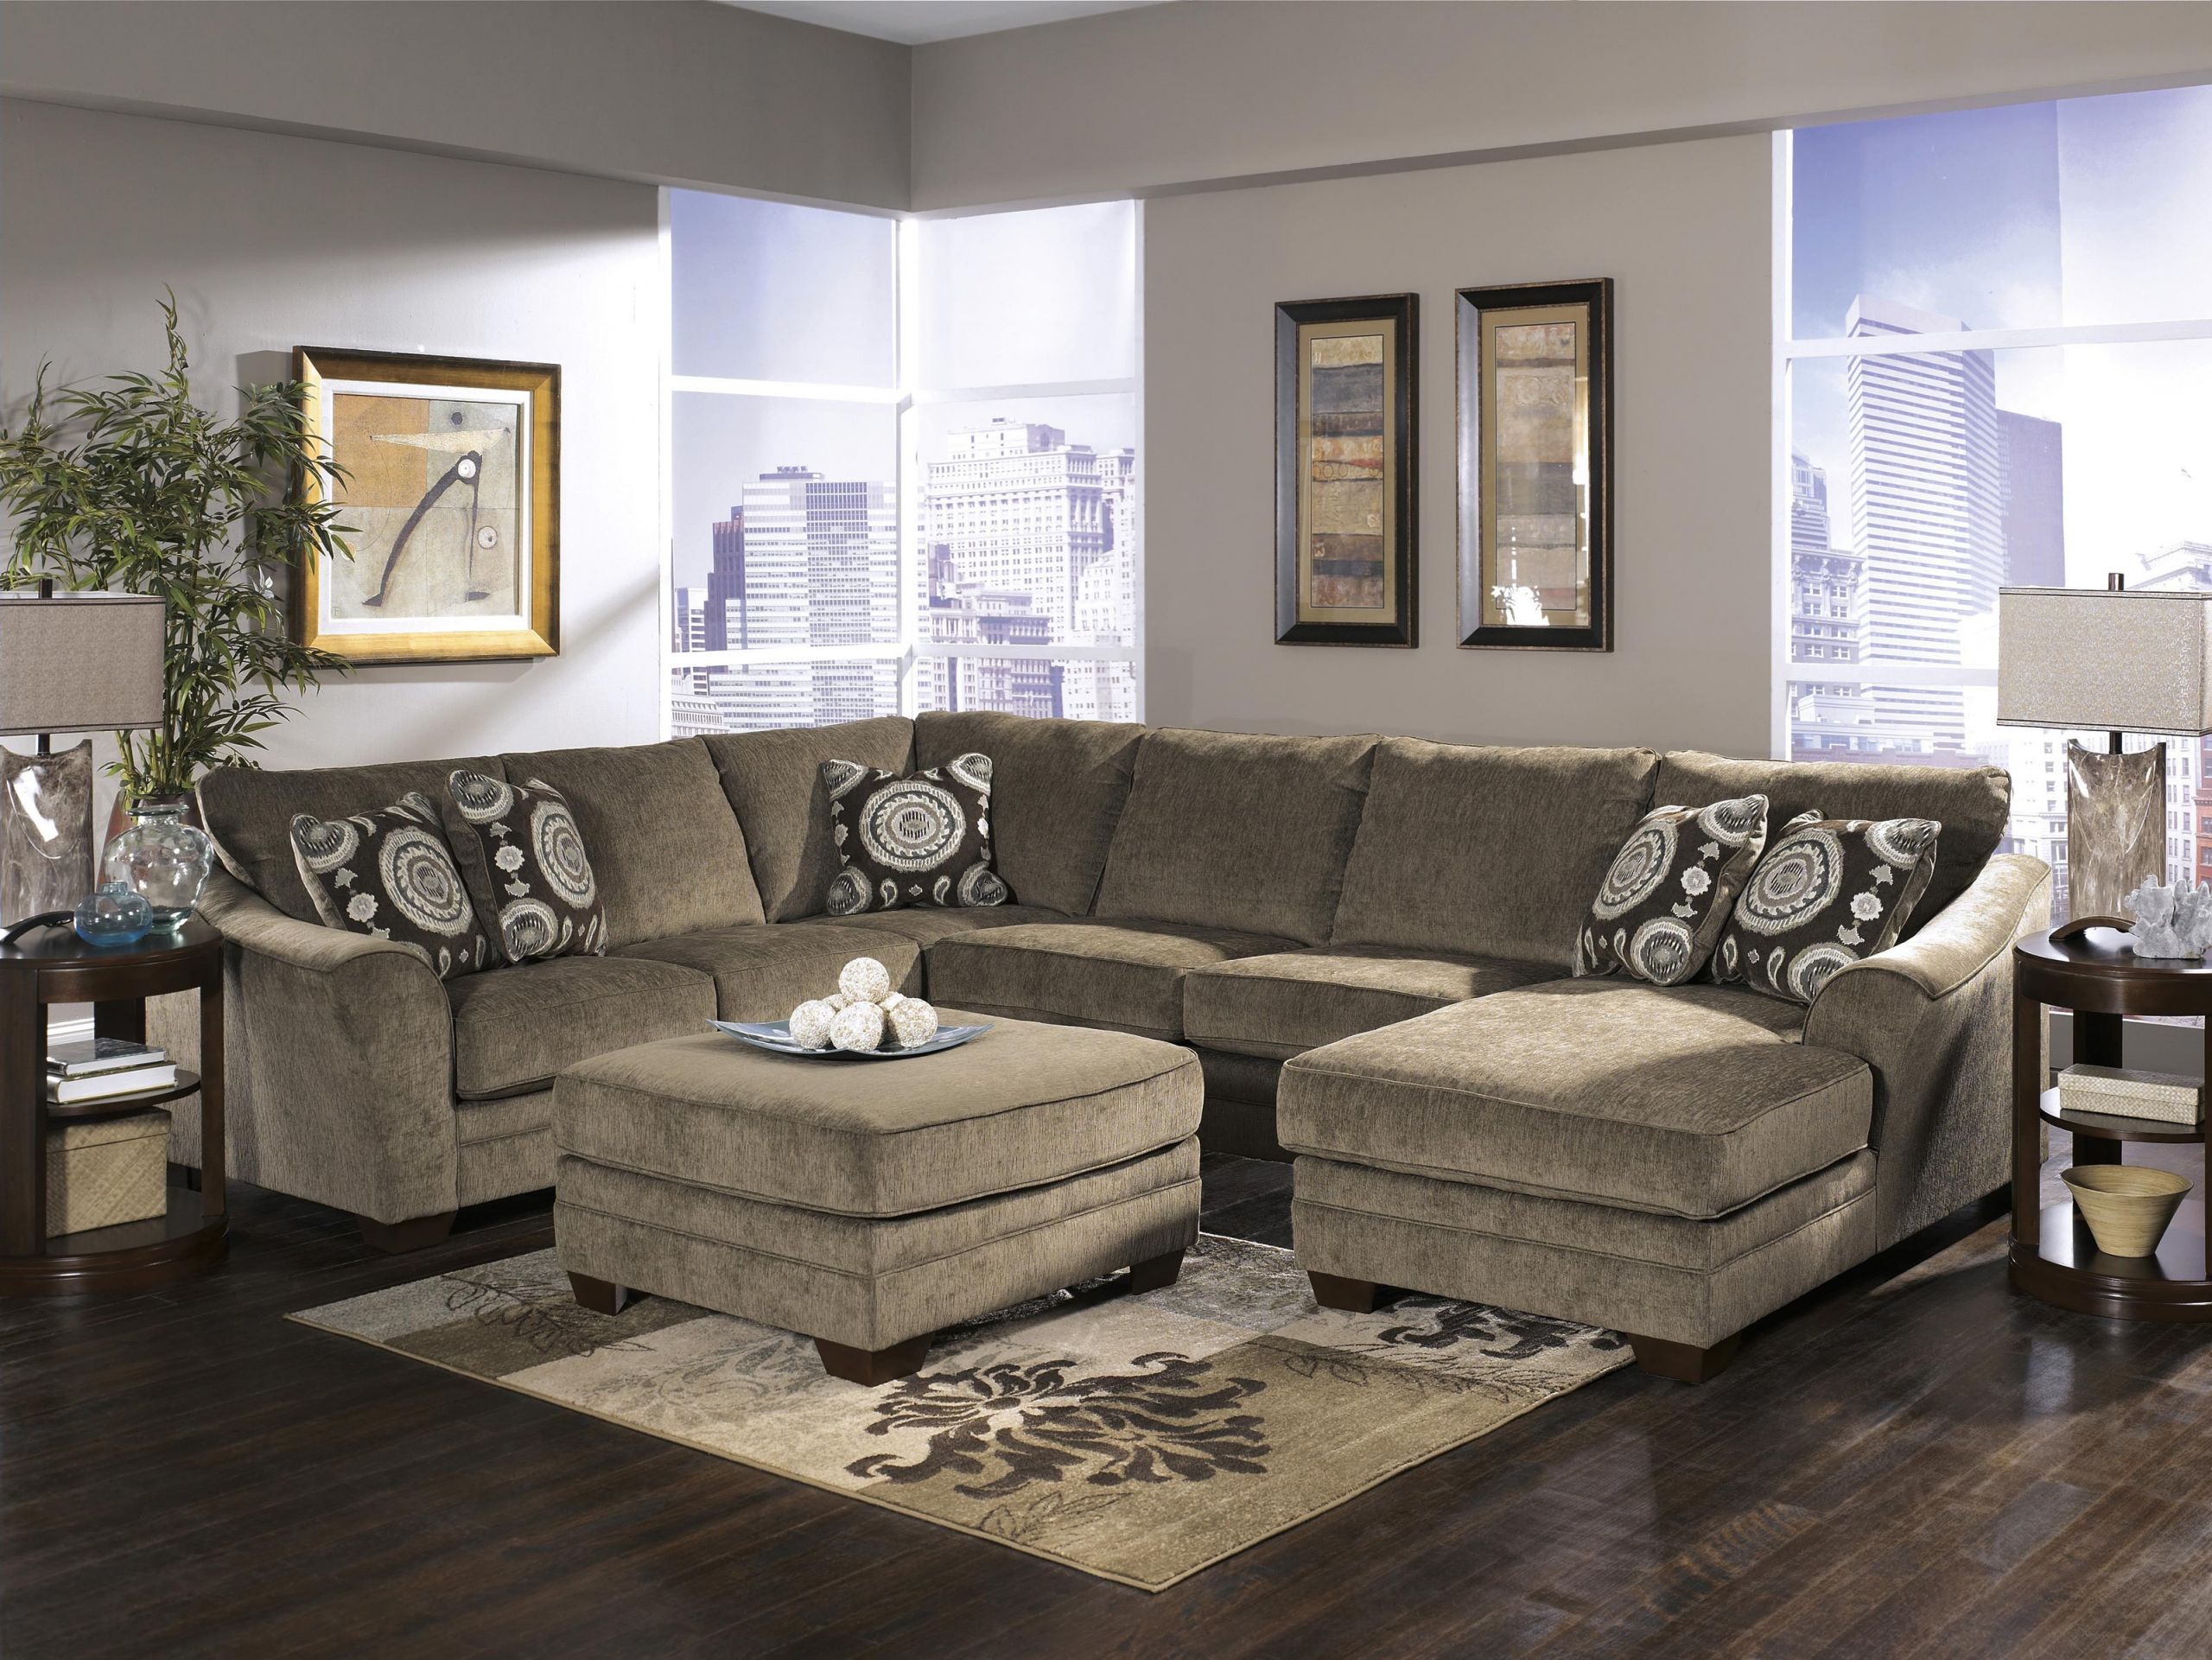 Couches For Small Living Room
 Living Room Ideas with Sectionals Sofa for Small Living